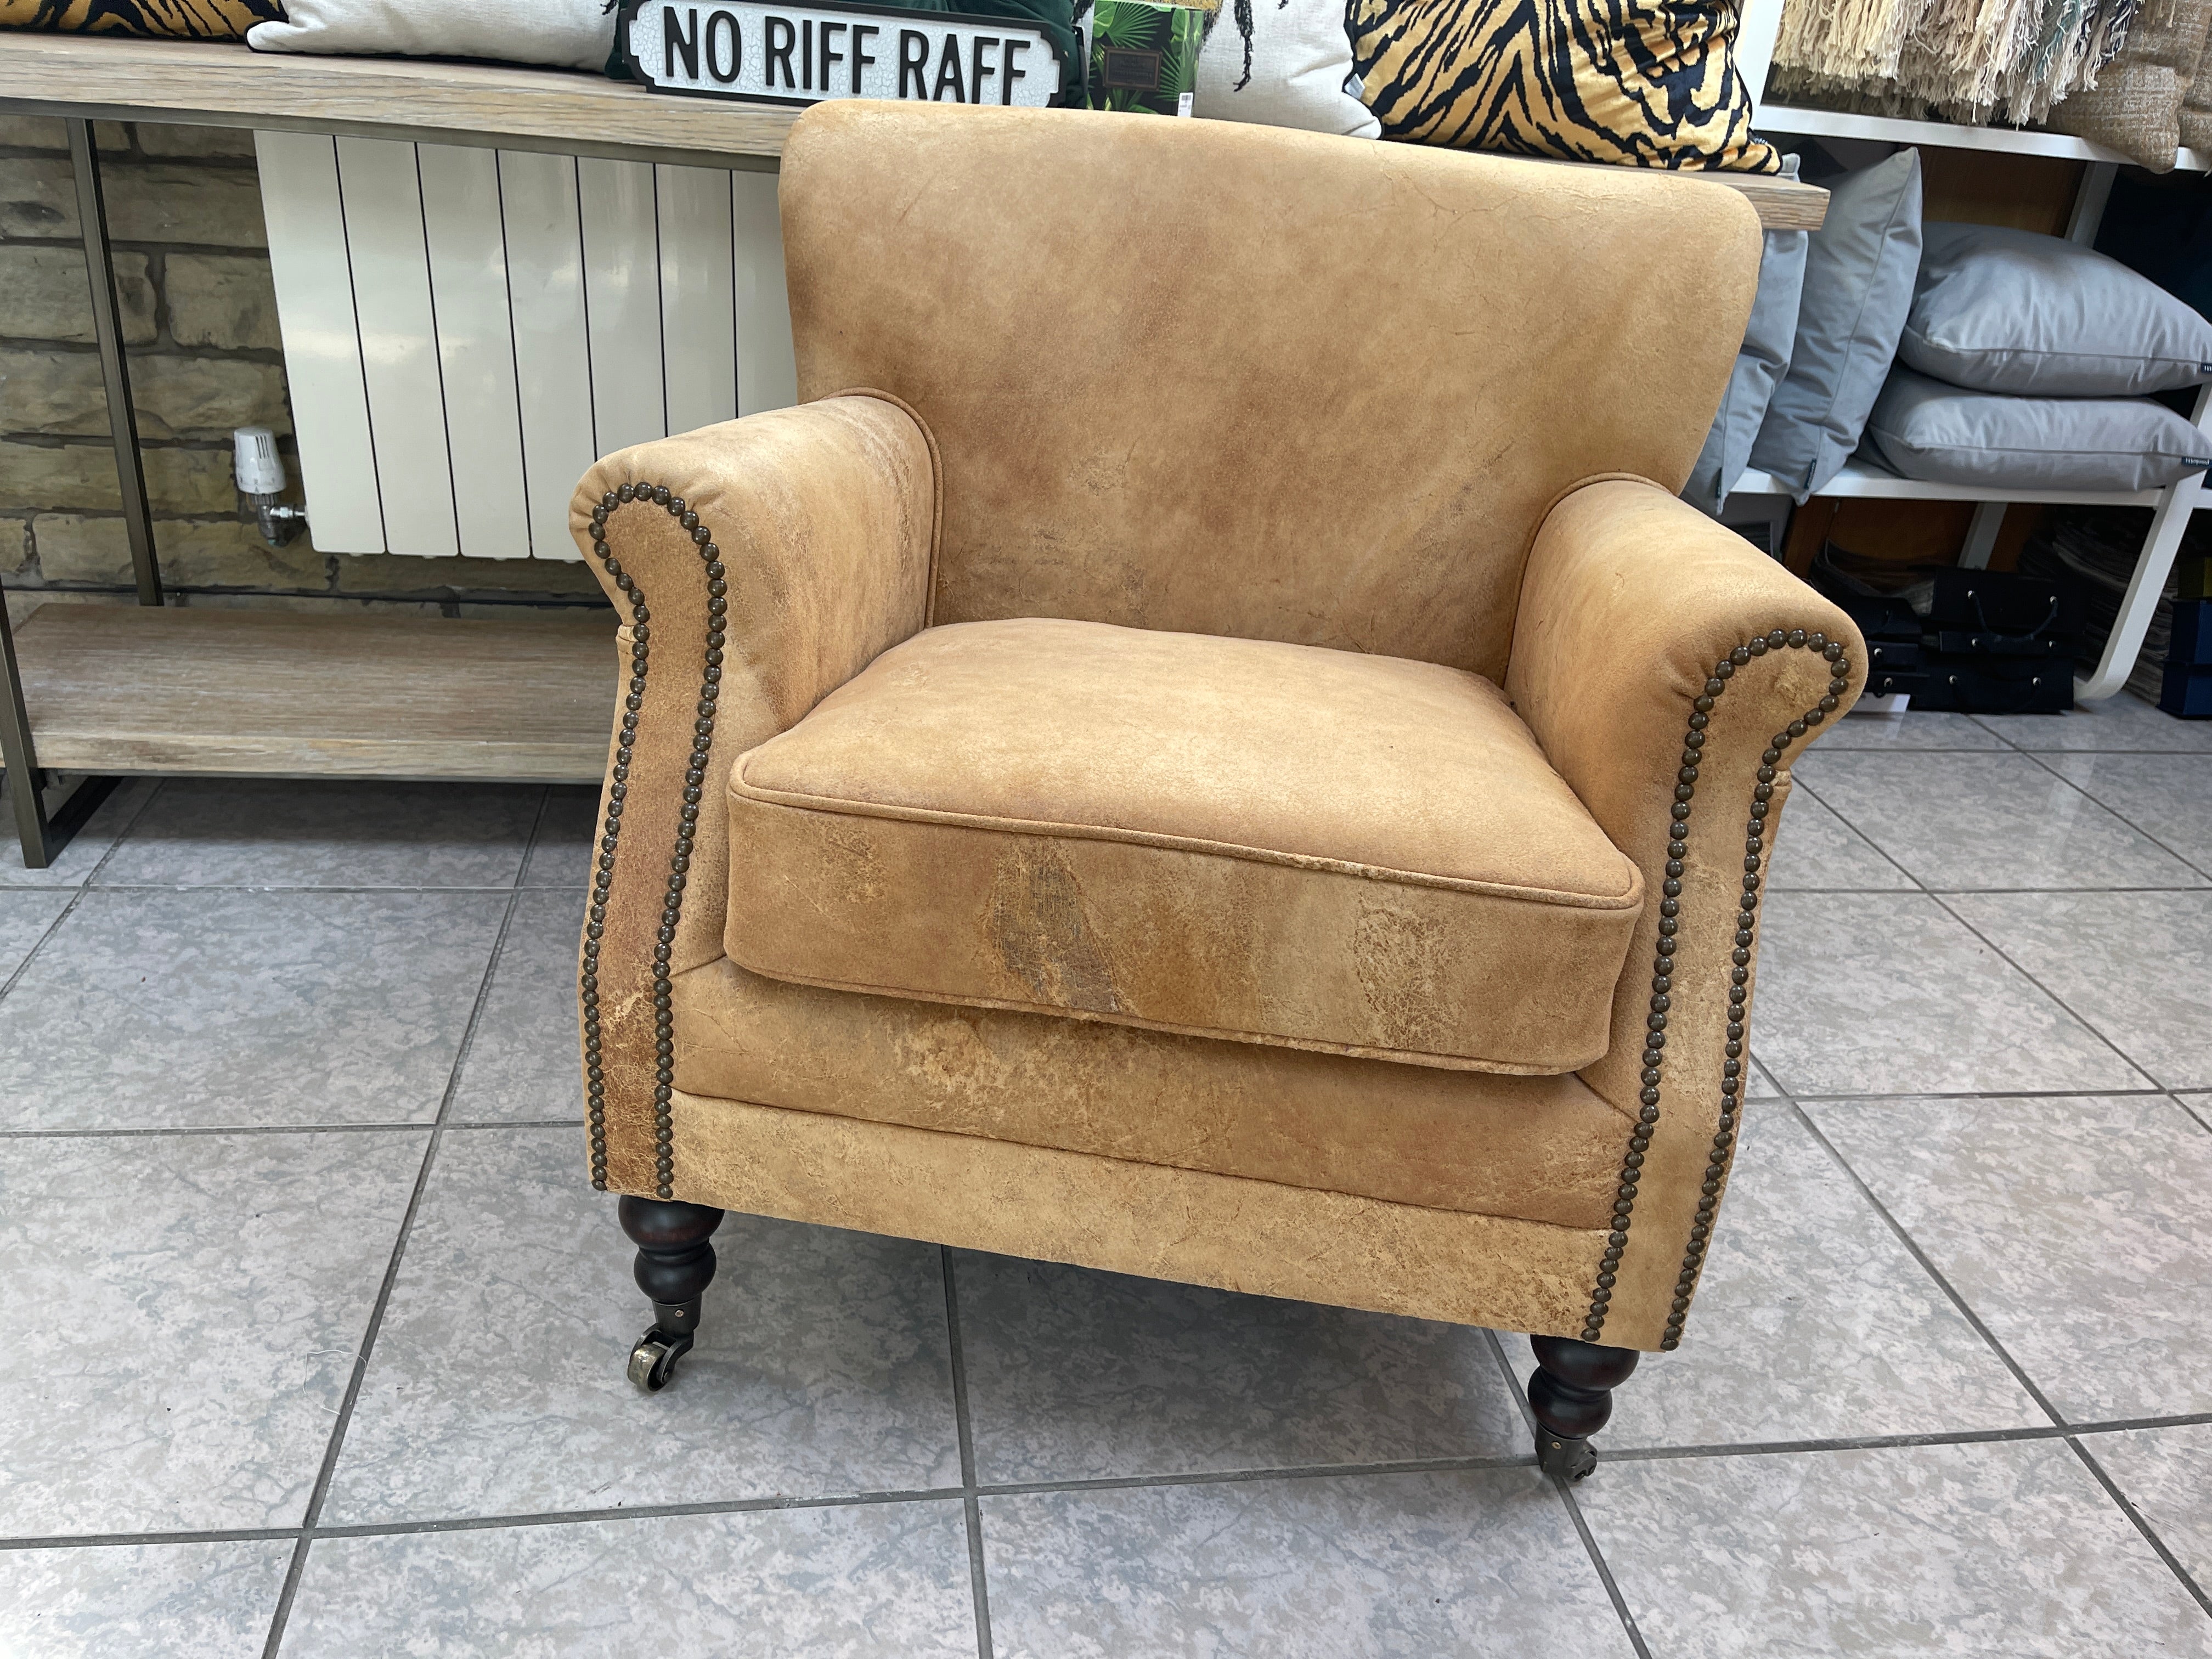 COACH HOUSE Vintage Chamois Tan Leather accent chair on castors with studs - pair available